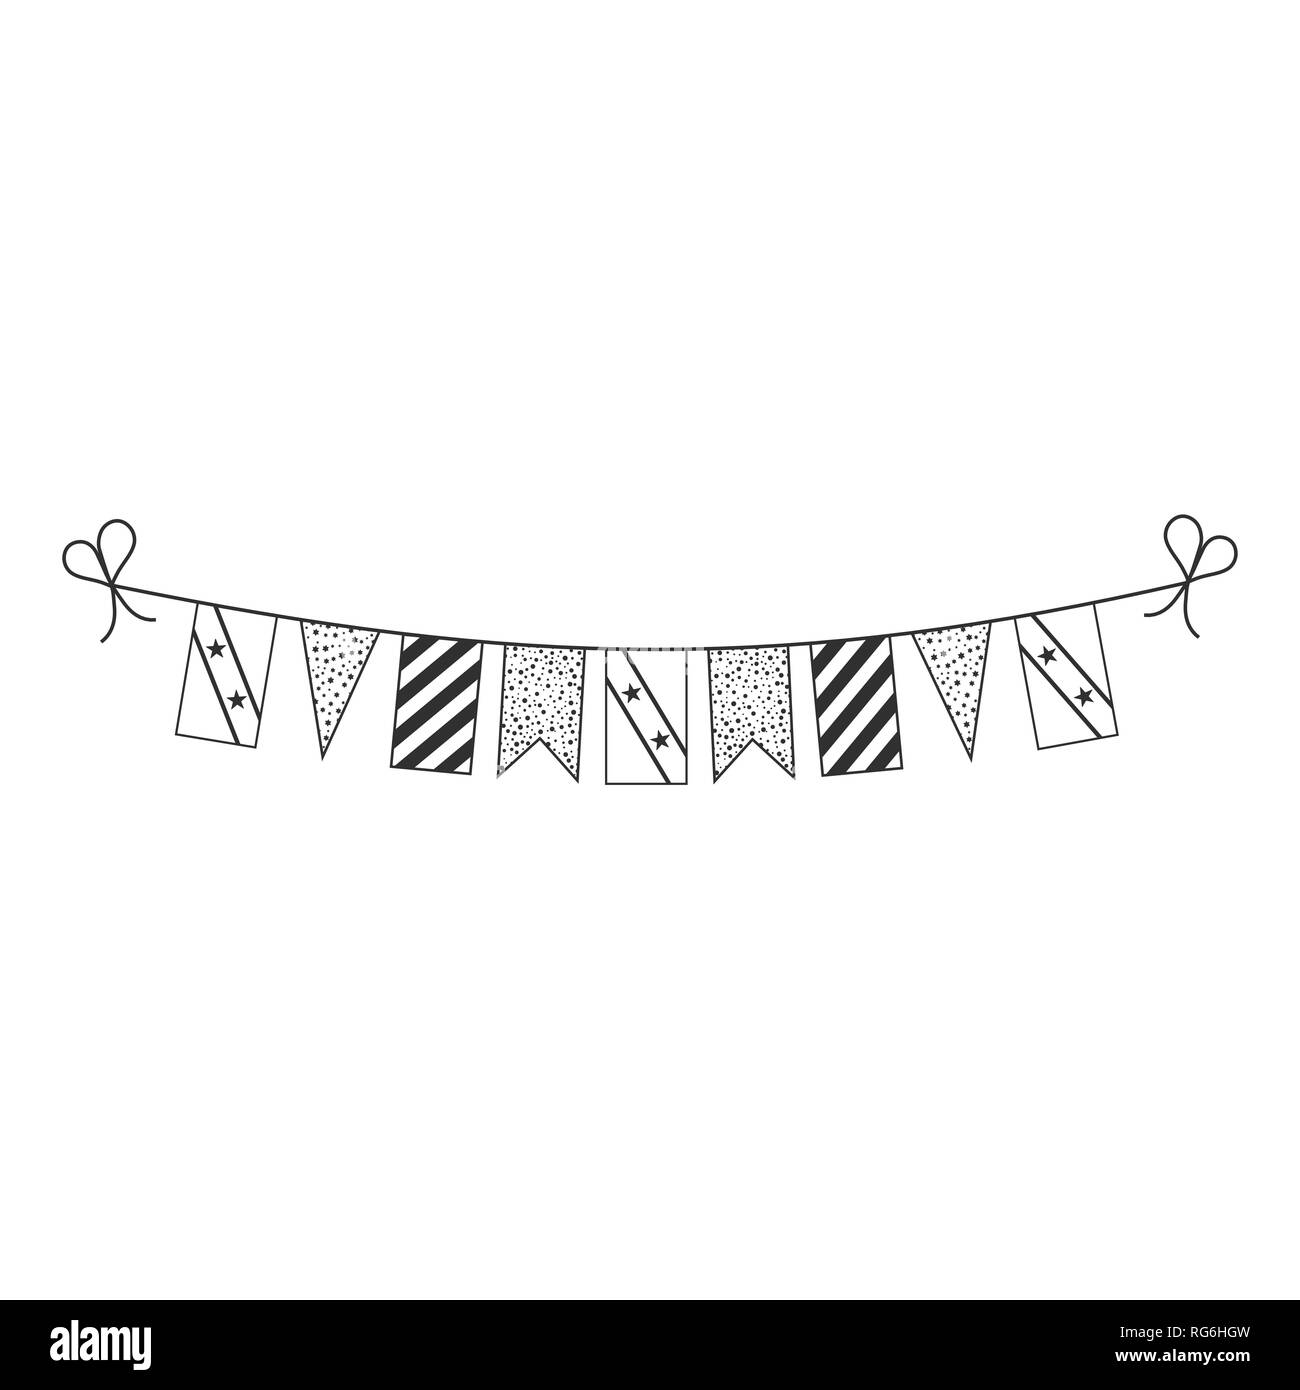 Decorations bunting flags for Saint Kitts and Nevis national day holiday in black outline flat design. Independence day or National day holiday concep Stock Vector